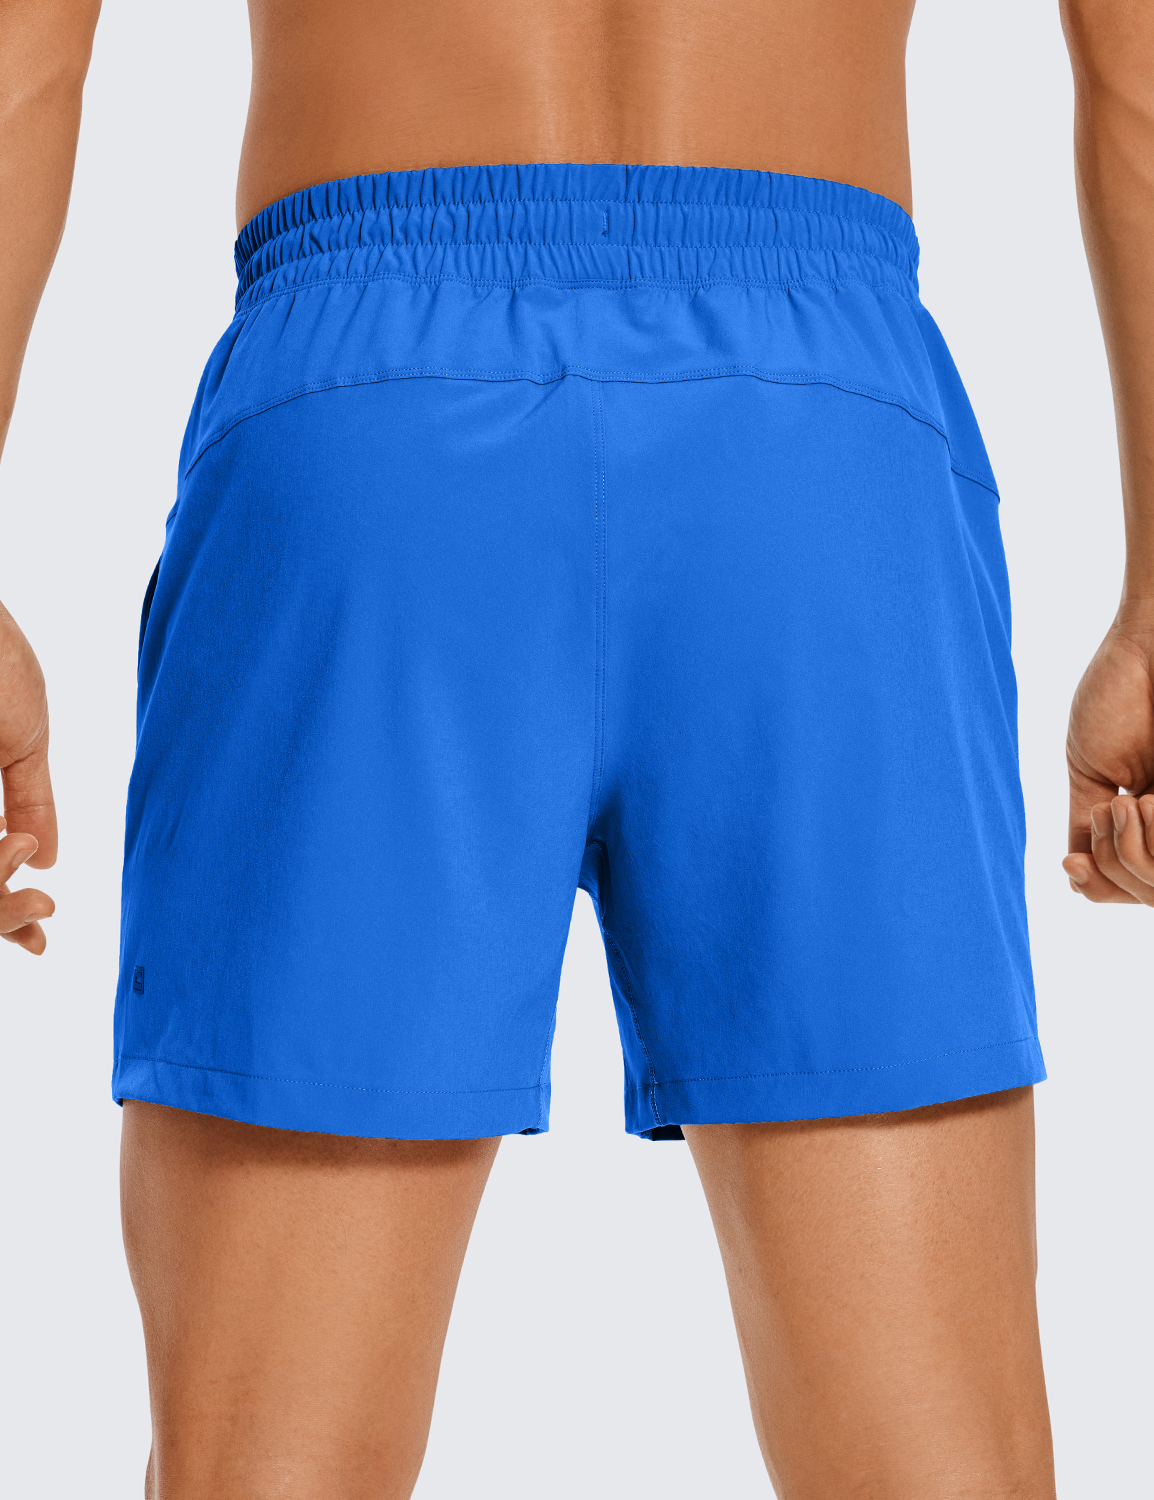 CRZ YOGA Men's Running Feathery-Fit Workout Linerless Shorts 5